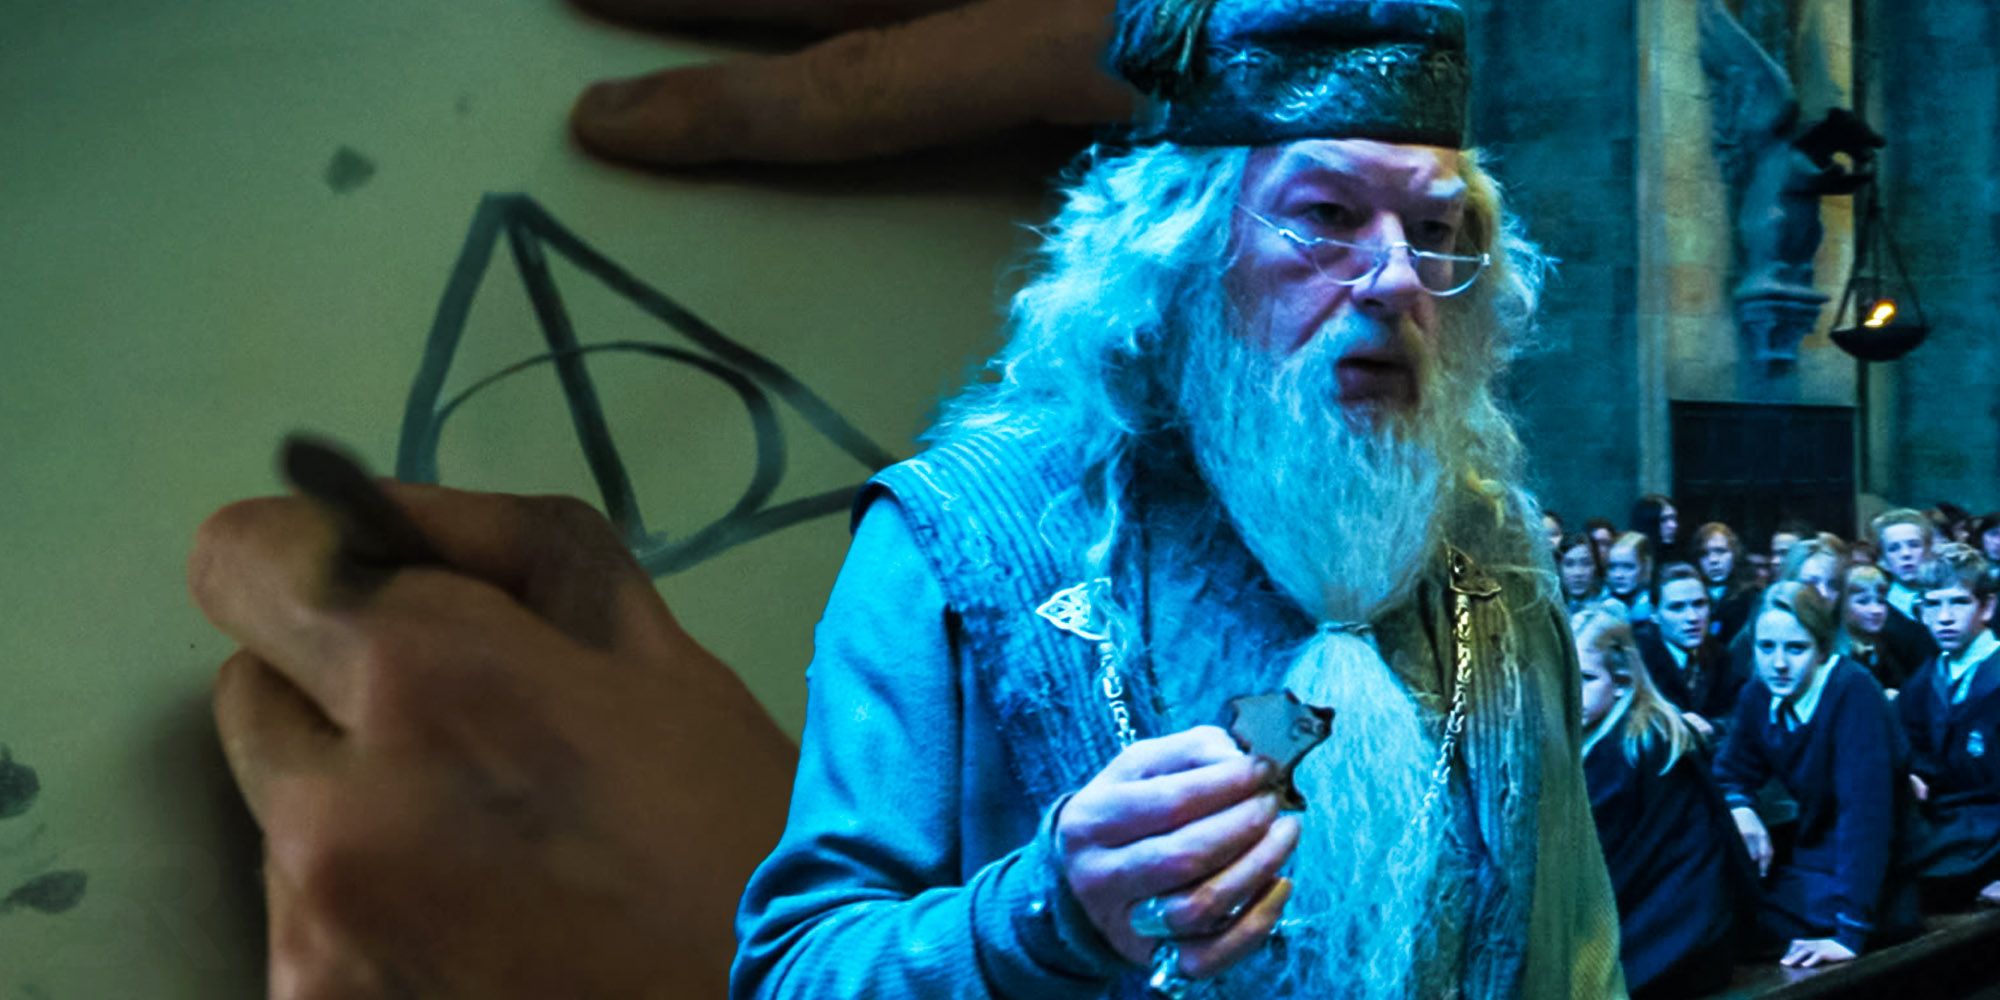 A composite image showing Dumbledore against the background of the Deathly Hallows symbol from Harry Potter. 